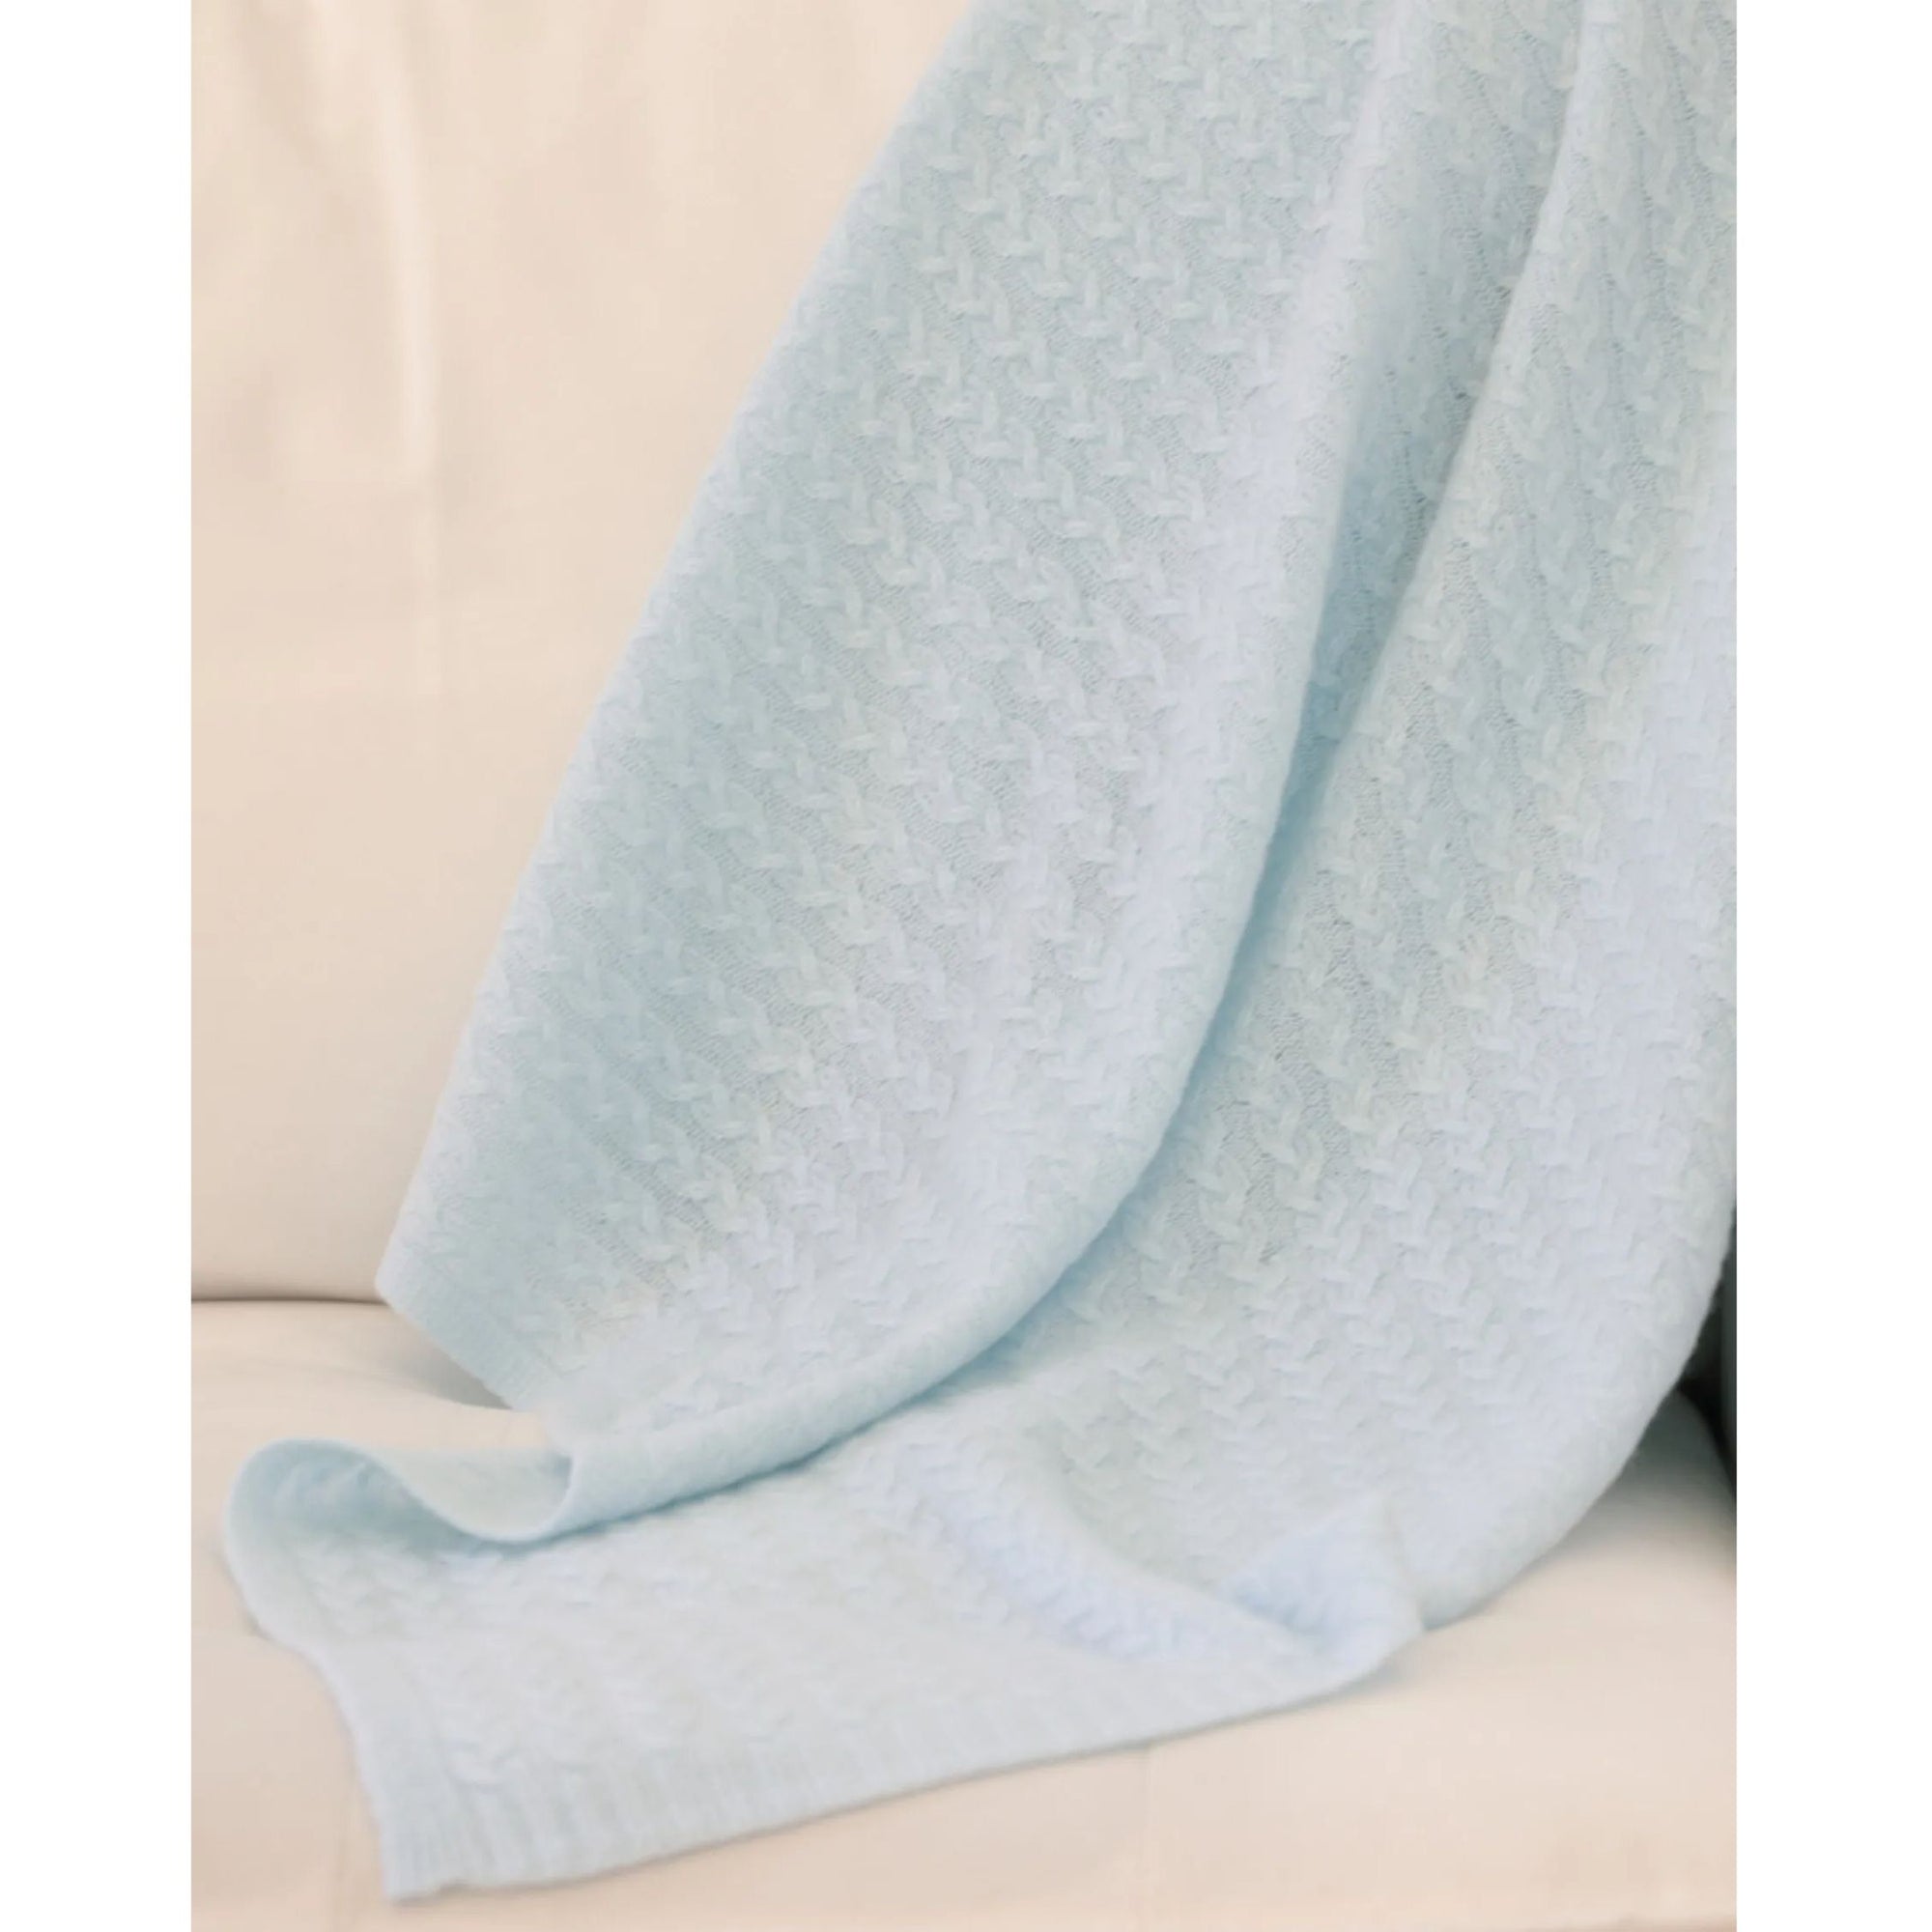 100% Cashmere Bailey Braided Cable Knit Baby Blanket (Choice of Colors) by Alashan Cashmere